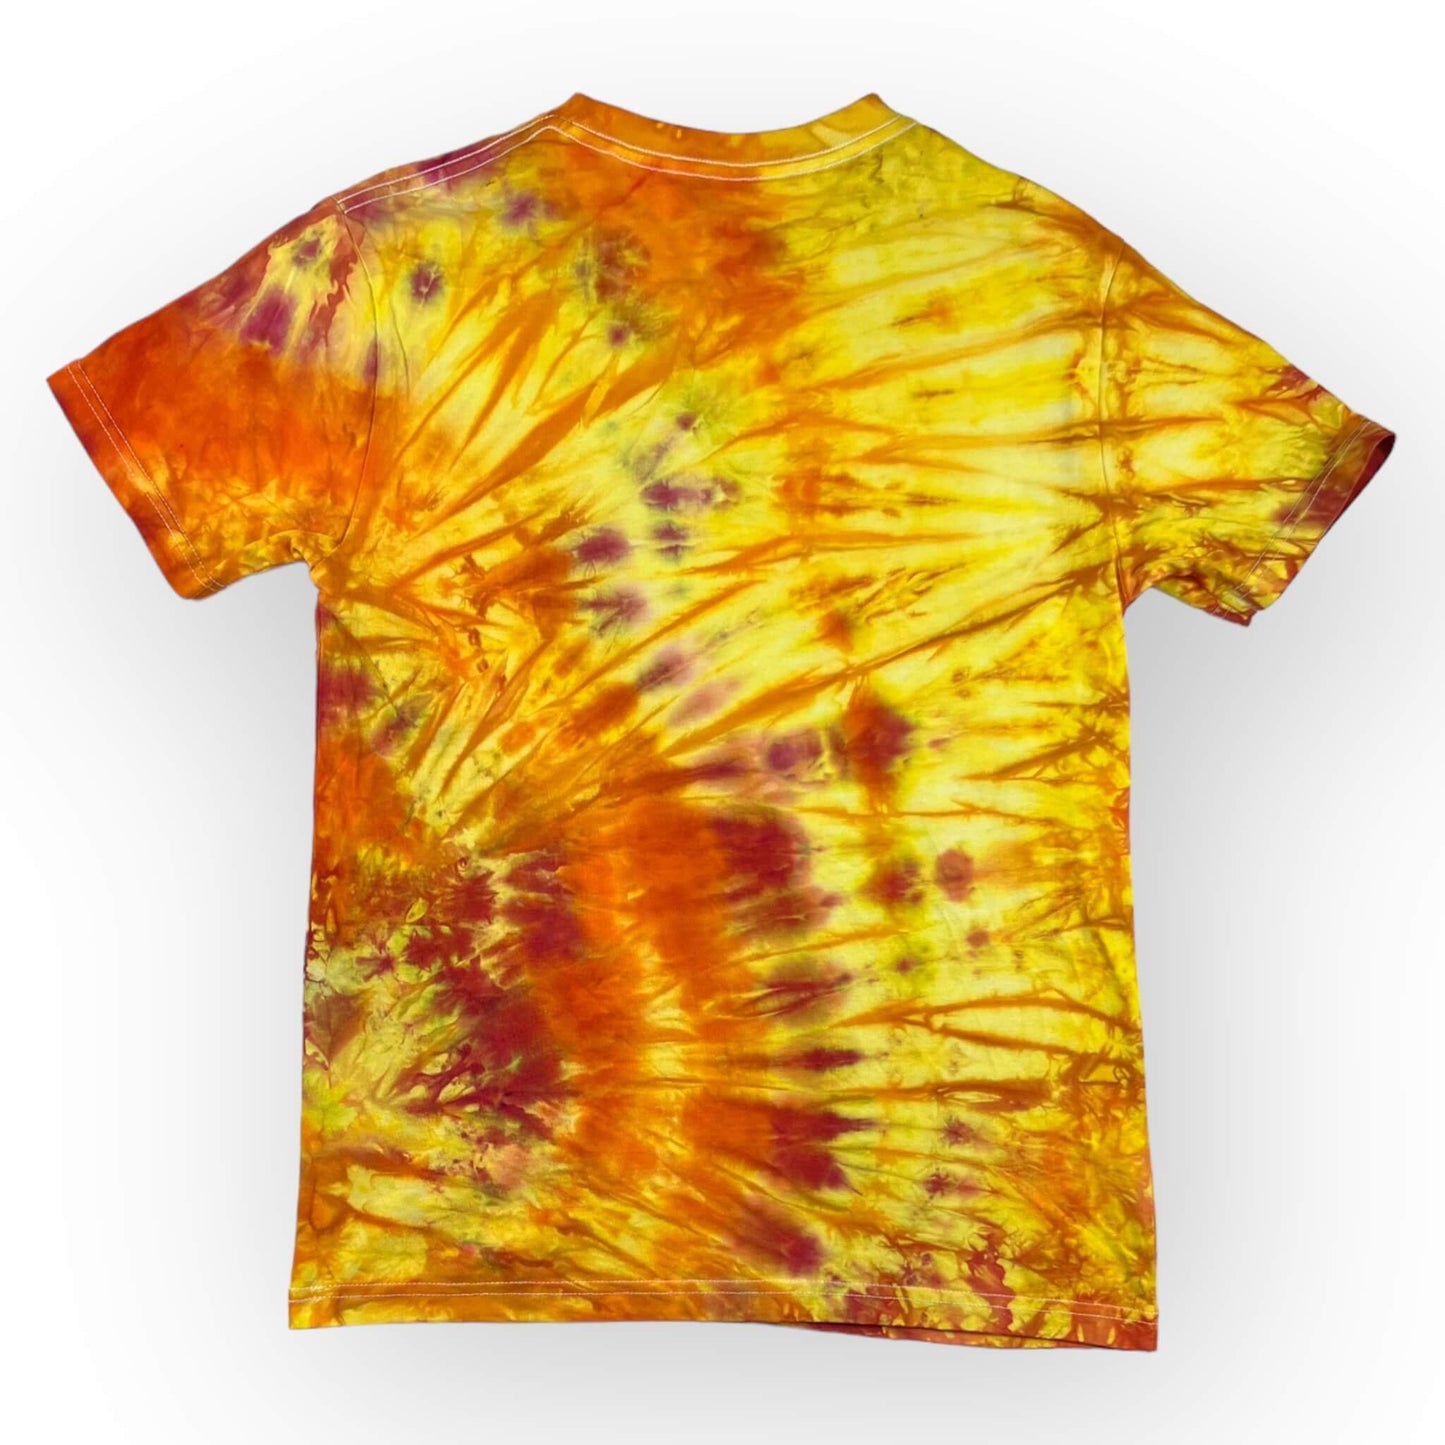 Oranges & Yellows Tie Dye Tee - Adult Small